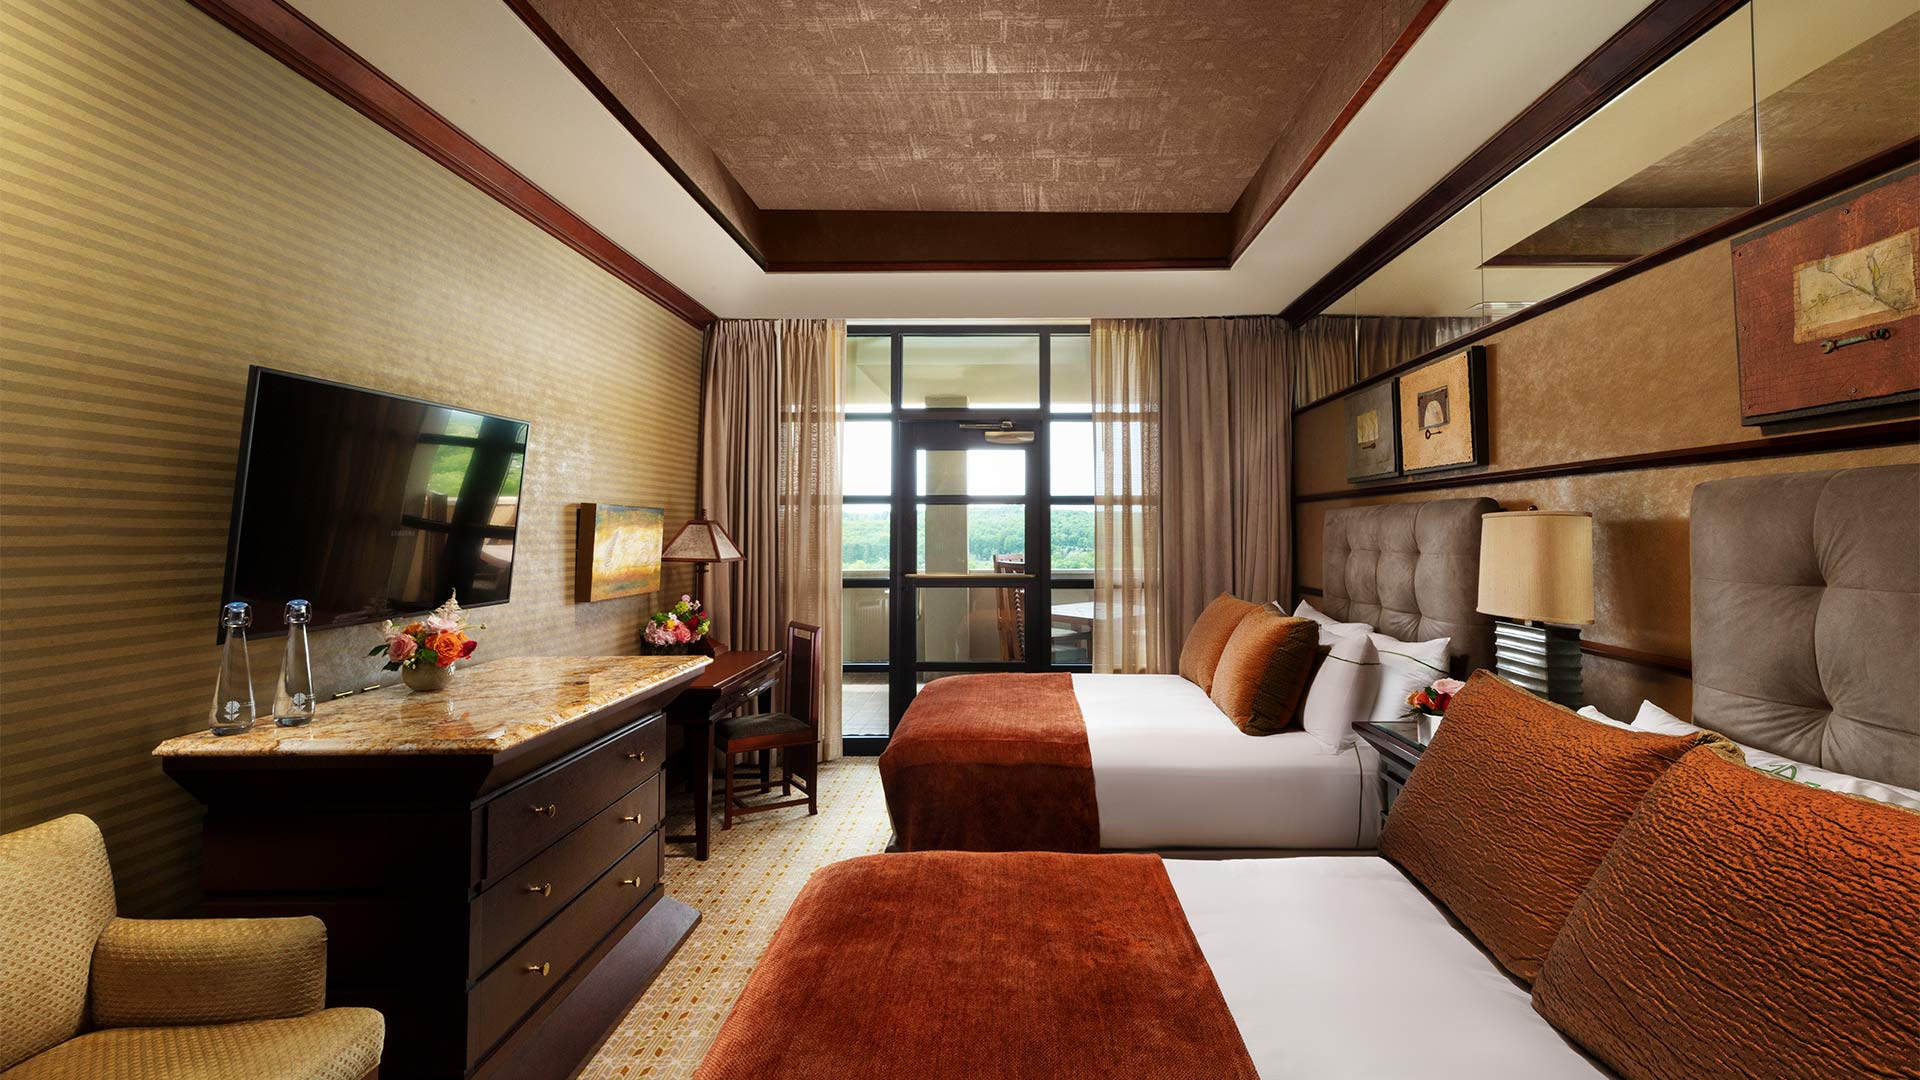 an interior shot of Falling Rock's double suite's bedroom. There are two queen size beds on the right side of the room with white and burnt orange bedding. Across from the beds is a desk and a dresser with a flat screen tv mounted above it. There is a door that leads out to a balcony that overlooks the resort grounds